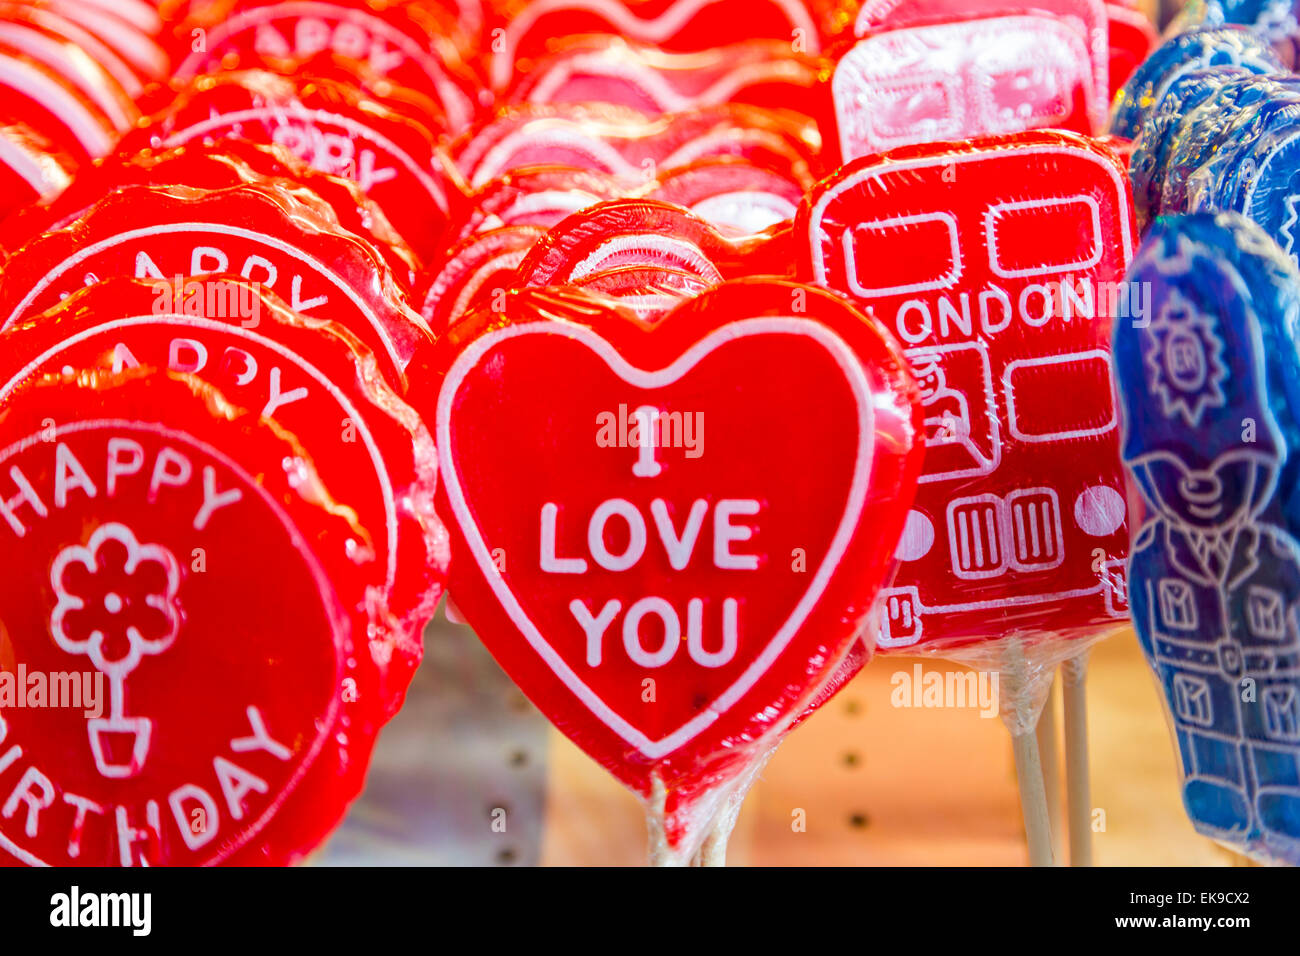 I Love You lollipops on sticks in bright red Stock Photo